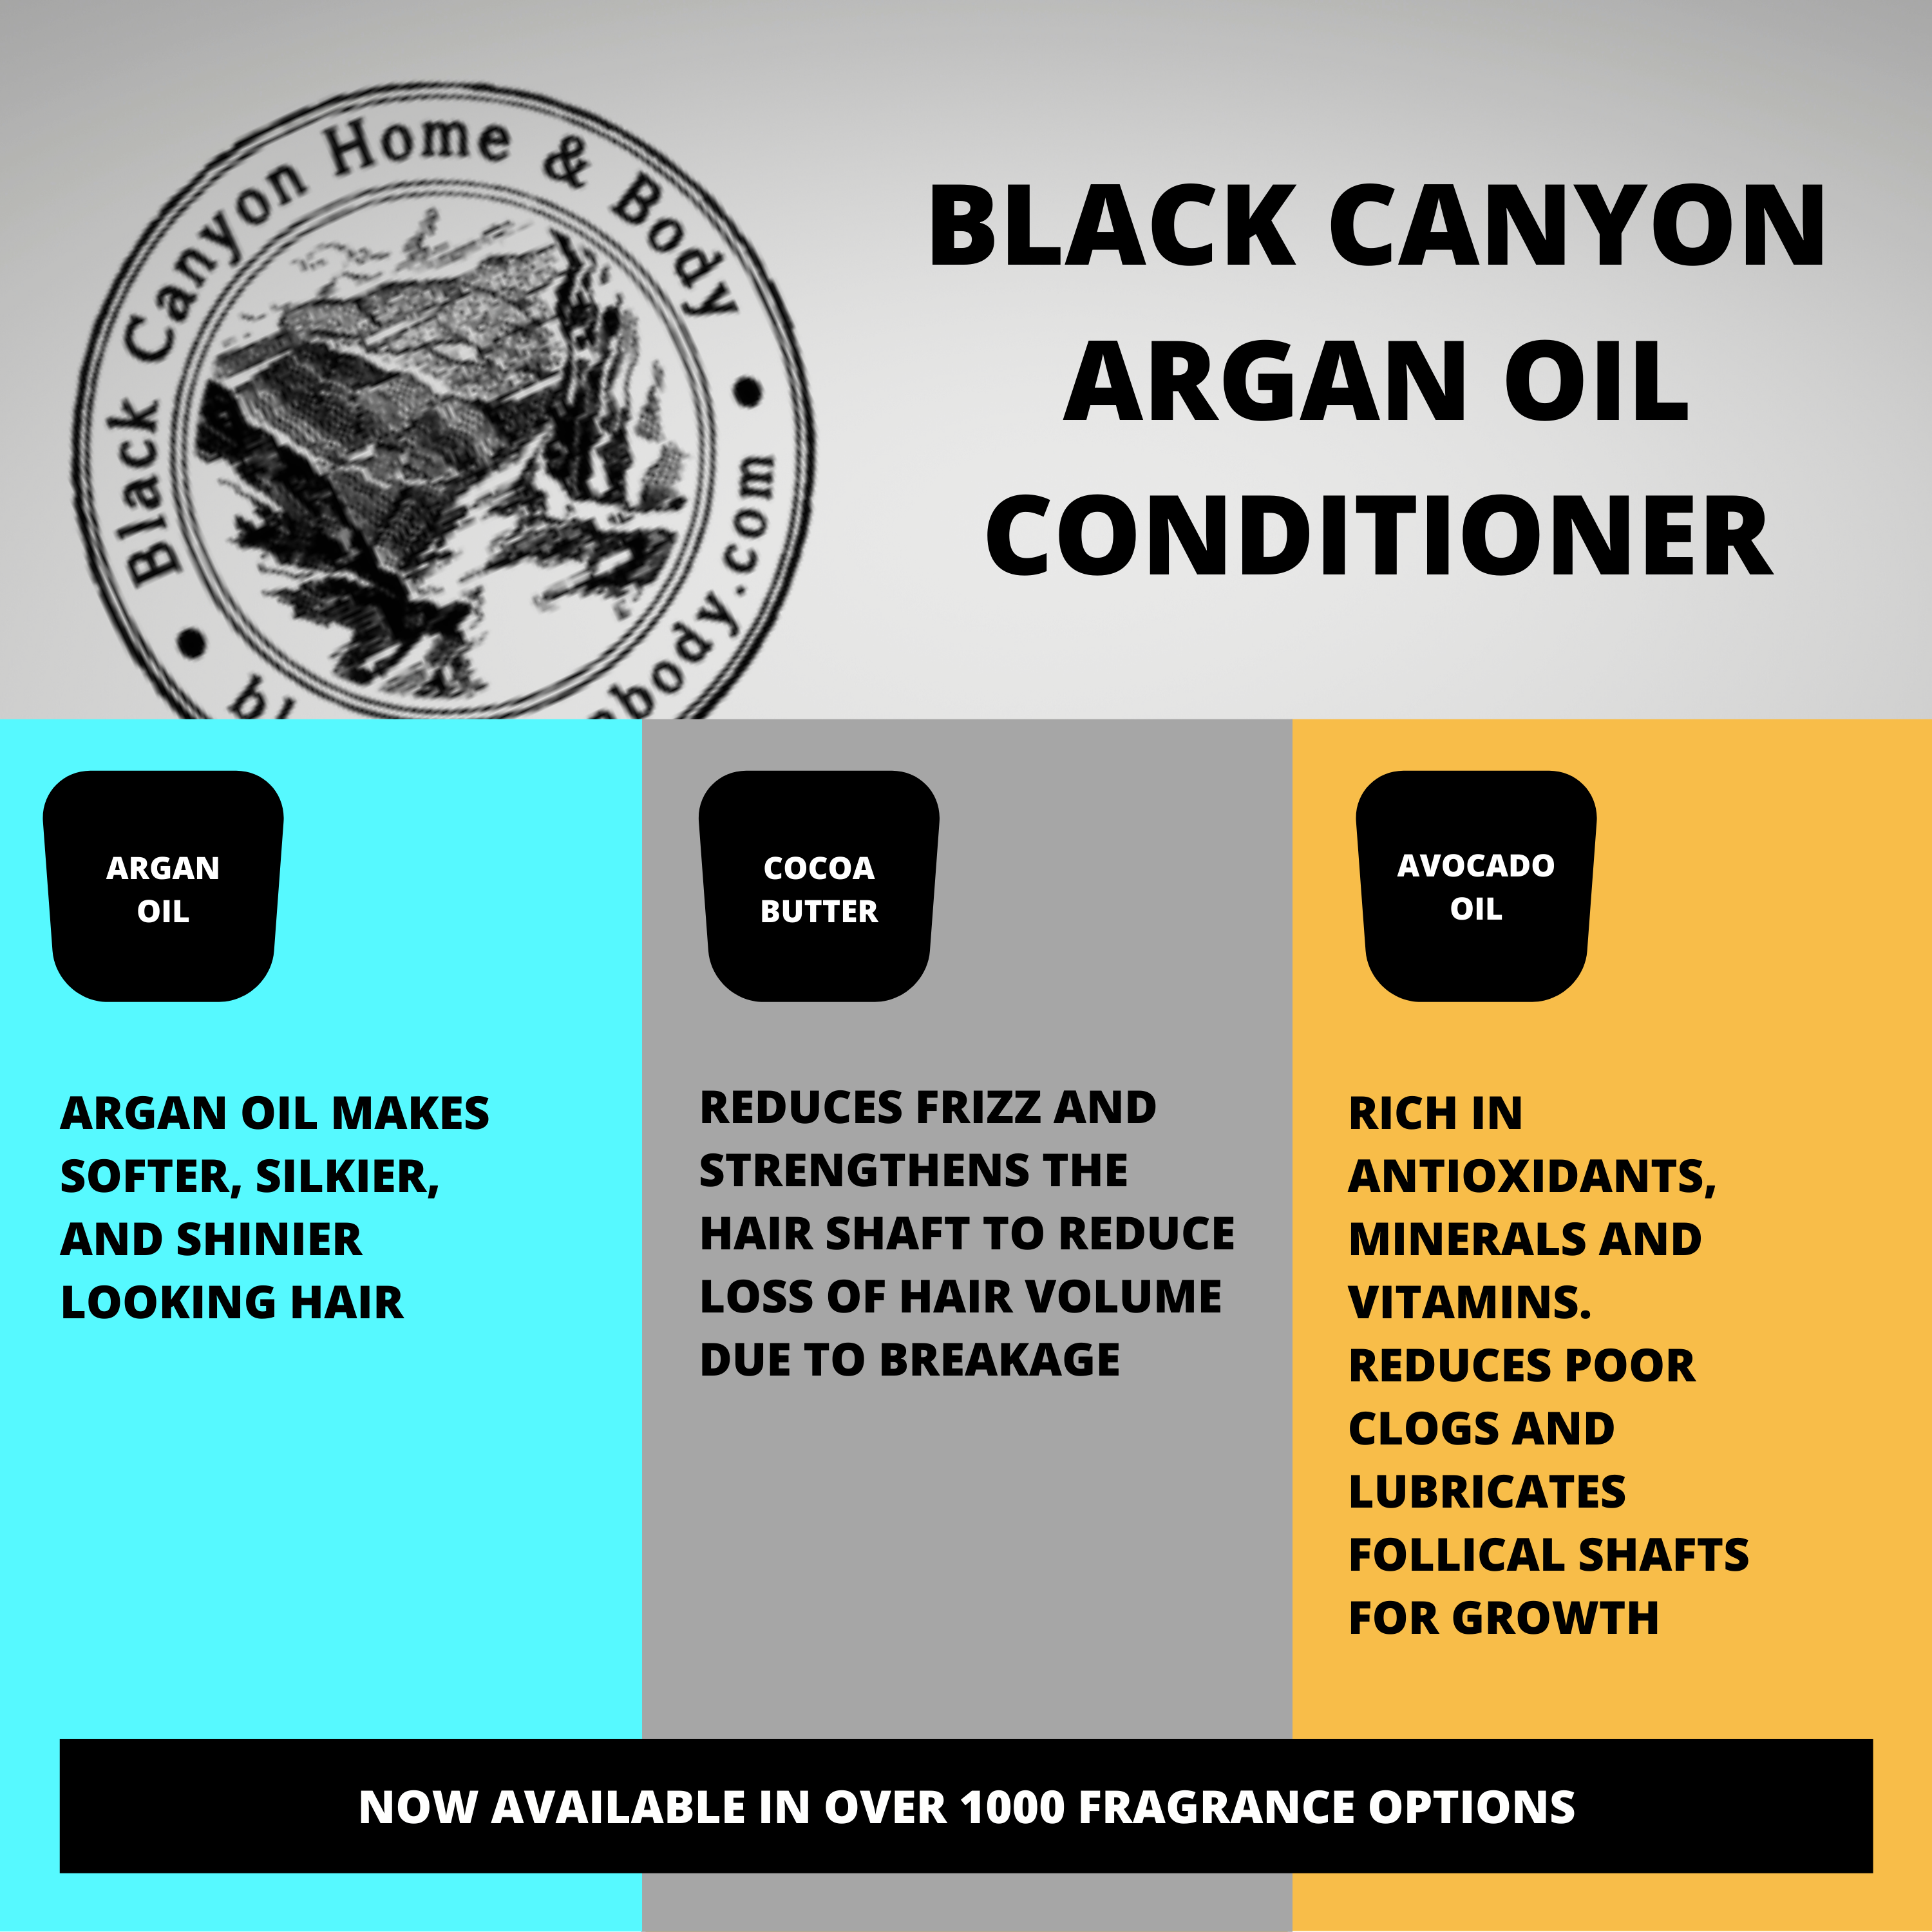 Black Canyon Lemon Drop Scented Conditioner with Argan Oil